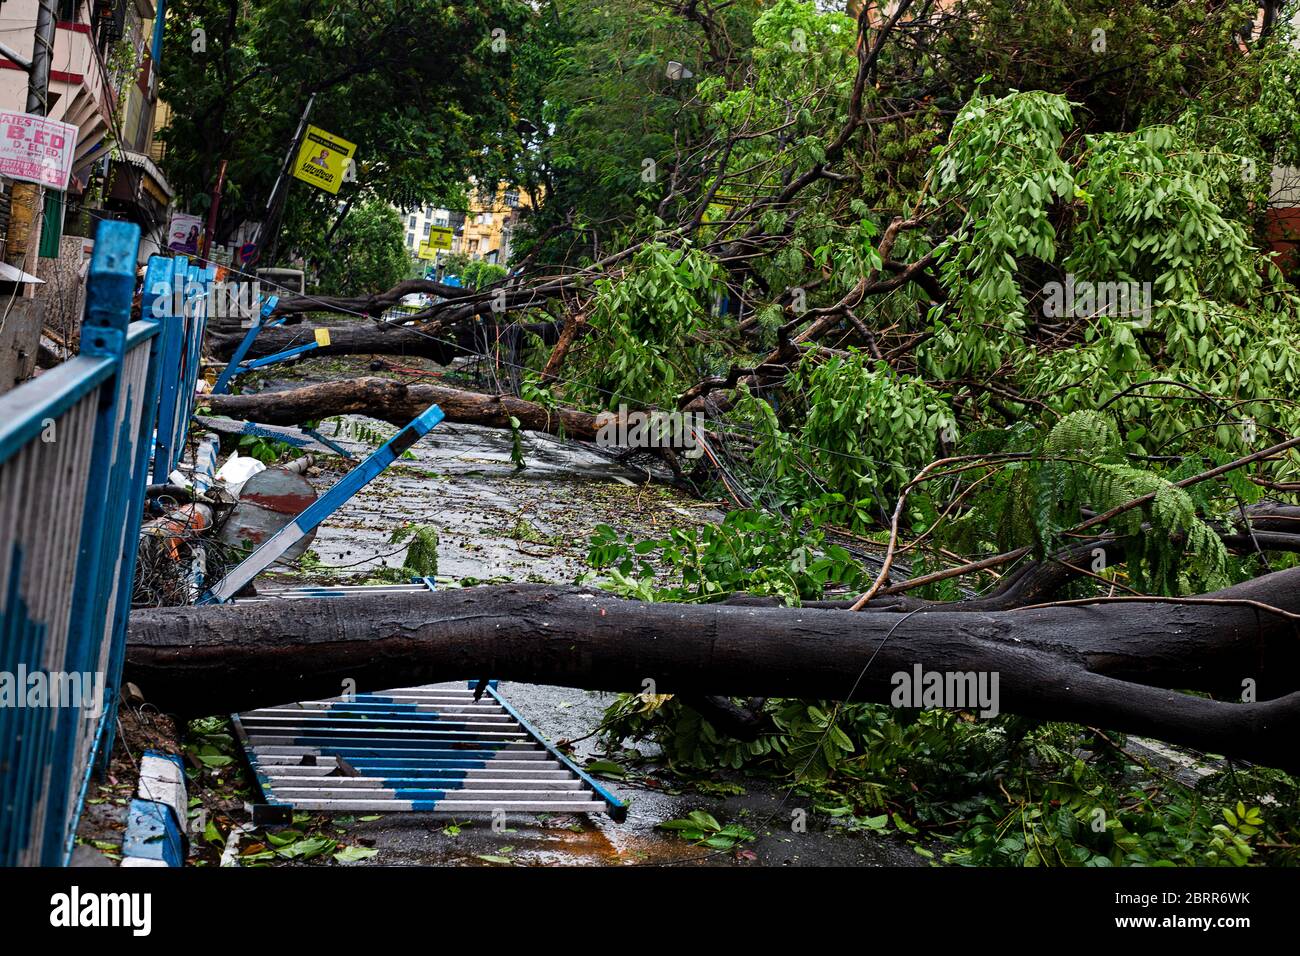 India 21st May Amphan Cyclone Effectively Made A Landfall In Kolkata In Late Afternoon Lasted For Four Hours With Approximately Two Hours Of Extremely Wind Blow At The Speed Of 133